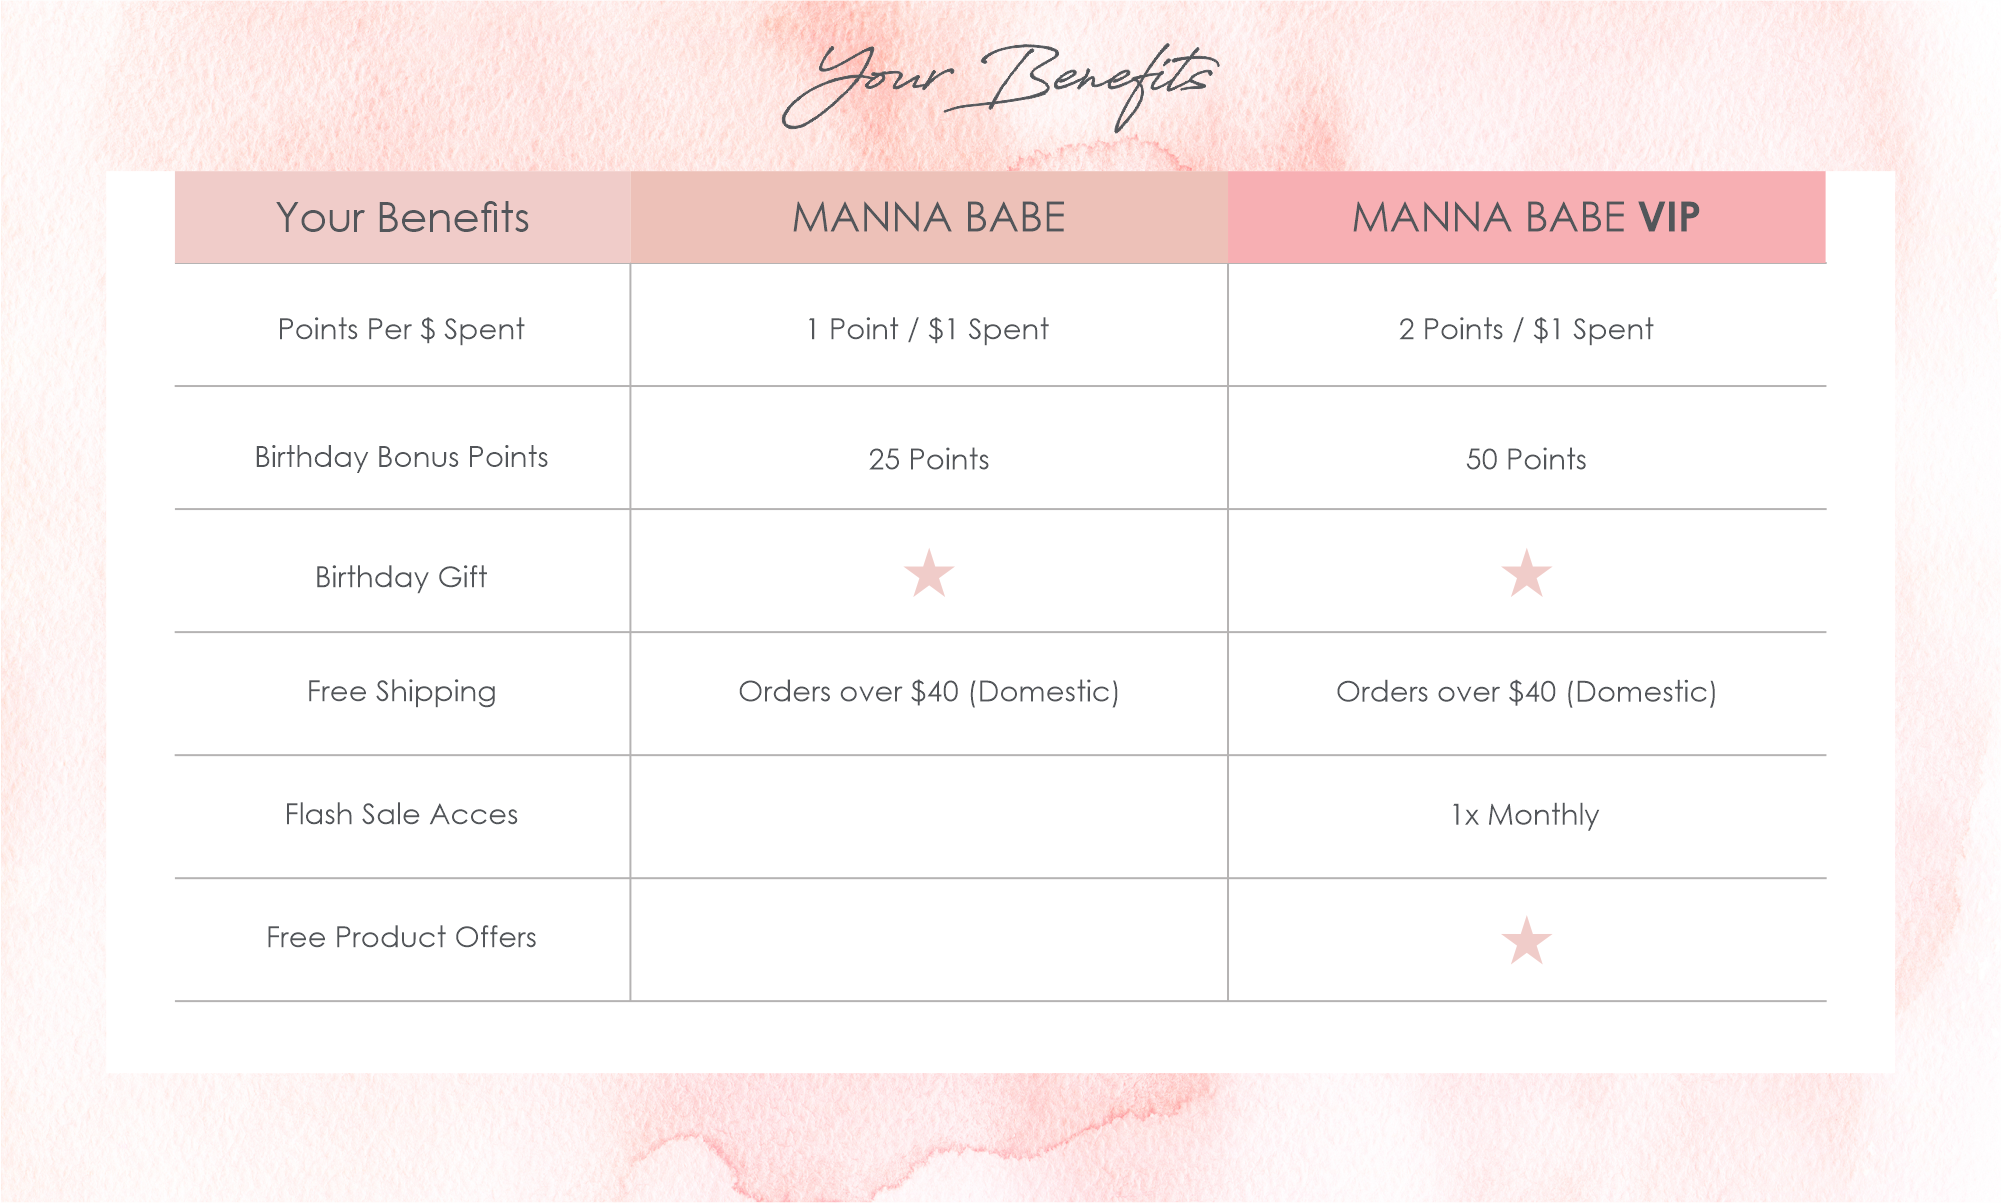 Your Benefits: Manna Babe versus Manna VIP - Manna Babe gets 1 point for every $1, 25 Bonus points on birthday, Birthday gift, Free Shipping on Domestics orders over $40. Manna VIP gets everything in Manna Babe program in addition to 2 Points for every $1, 50 Bonus points on Birthday, 1 Monthly Flash Sale, and Free Product Offers.